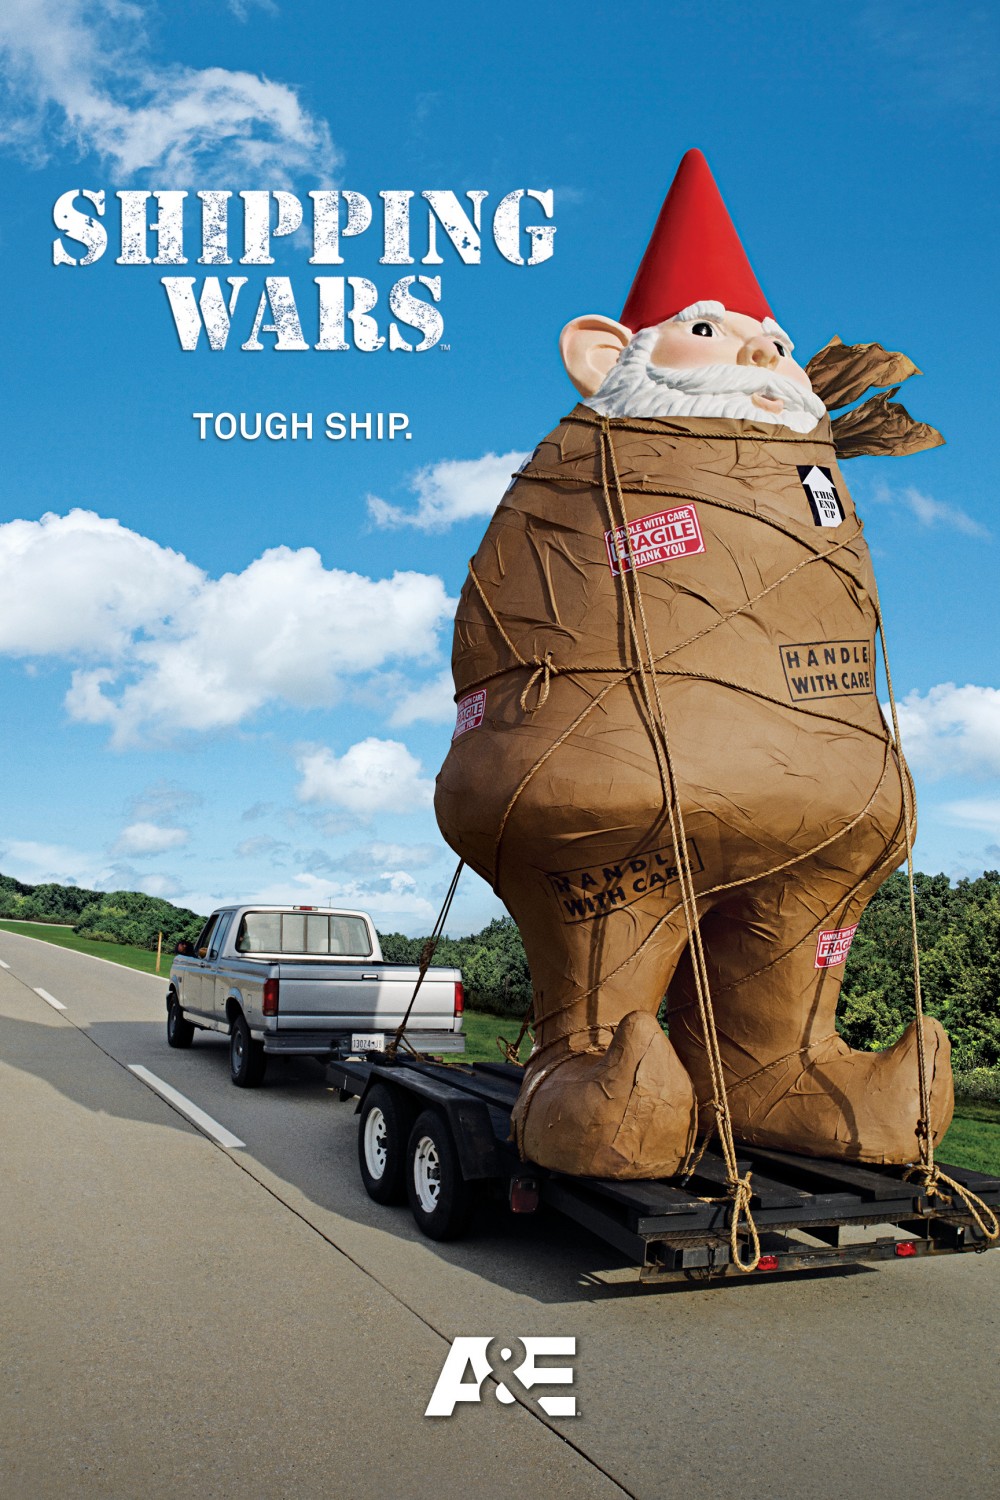 Extra Large TV Poster Image for Shipping Wars 